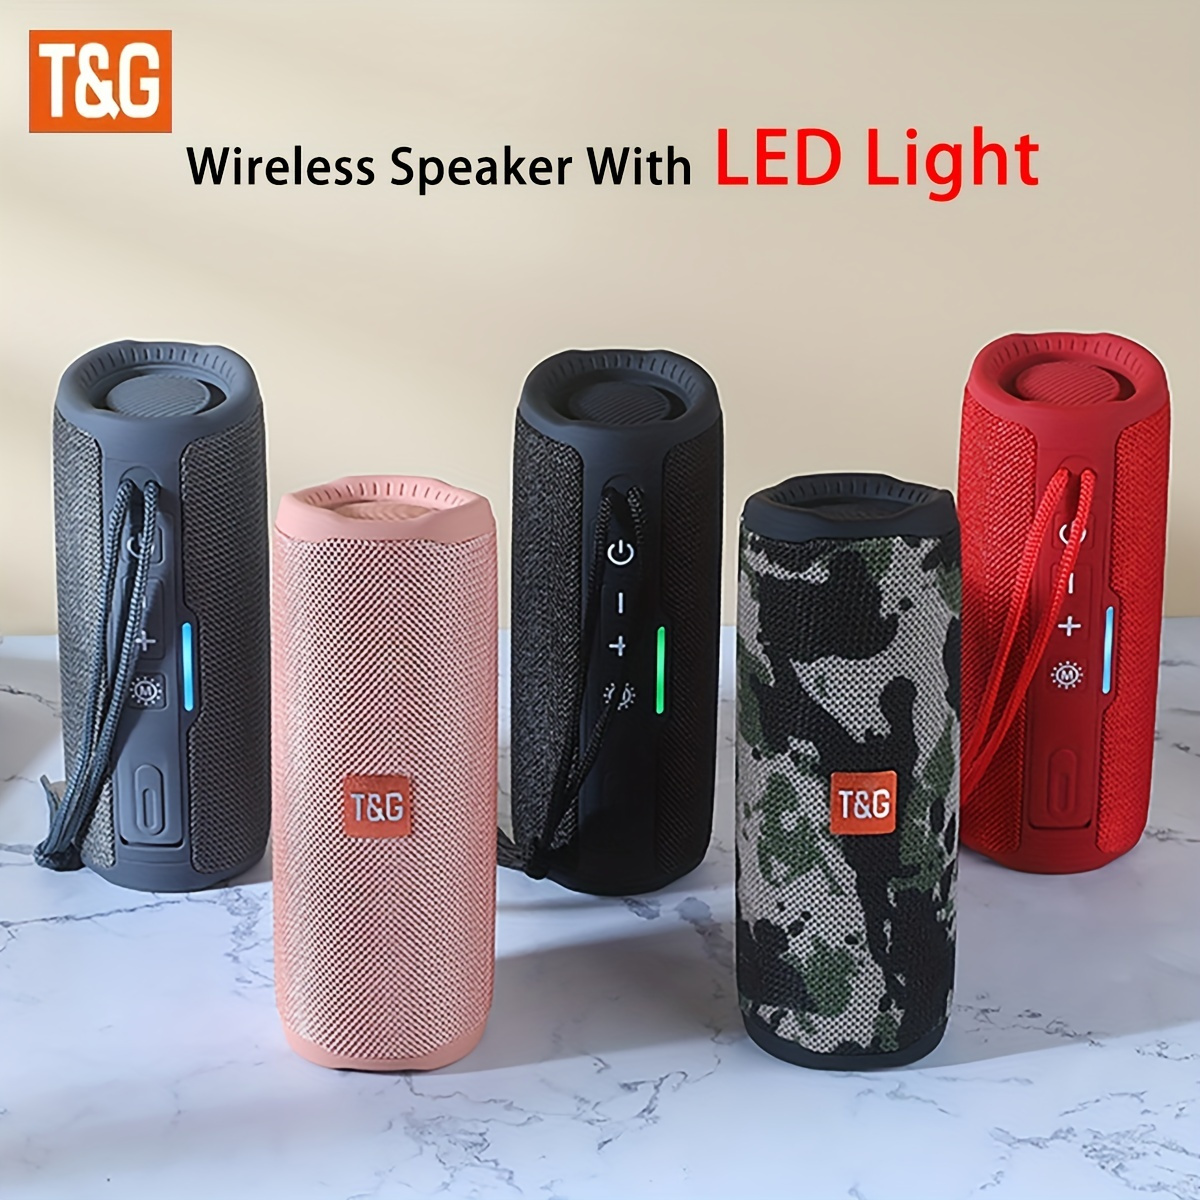 

T&g365 Wireless Speaker With Led Lights, Portable Wireless Speaker, Built-in Mic, Loud Stereo Sound, Support , \tf Card, For Pc, Cell Phone